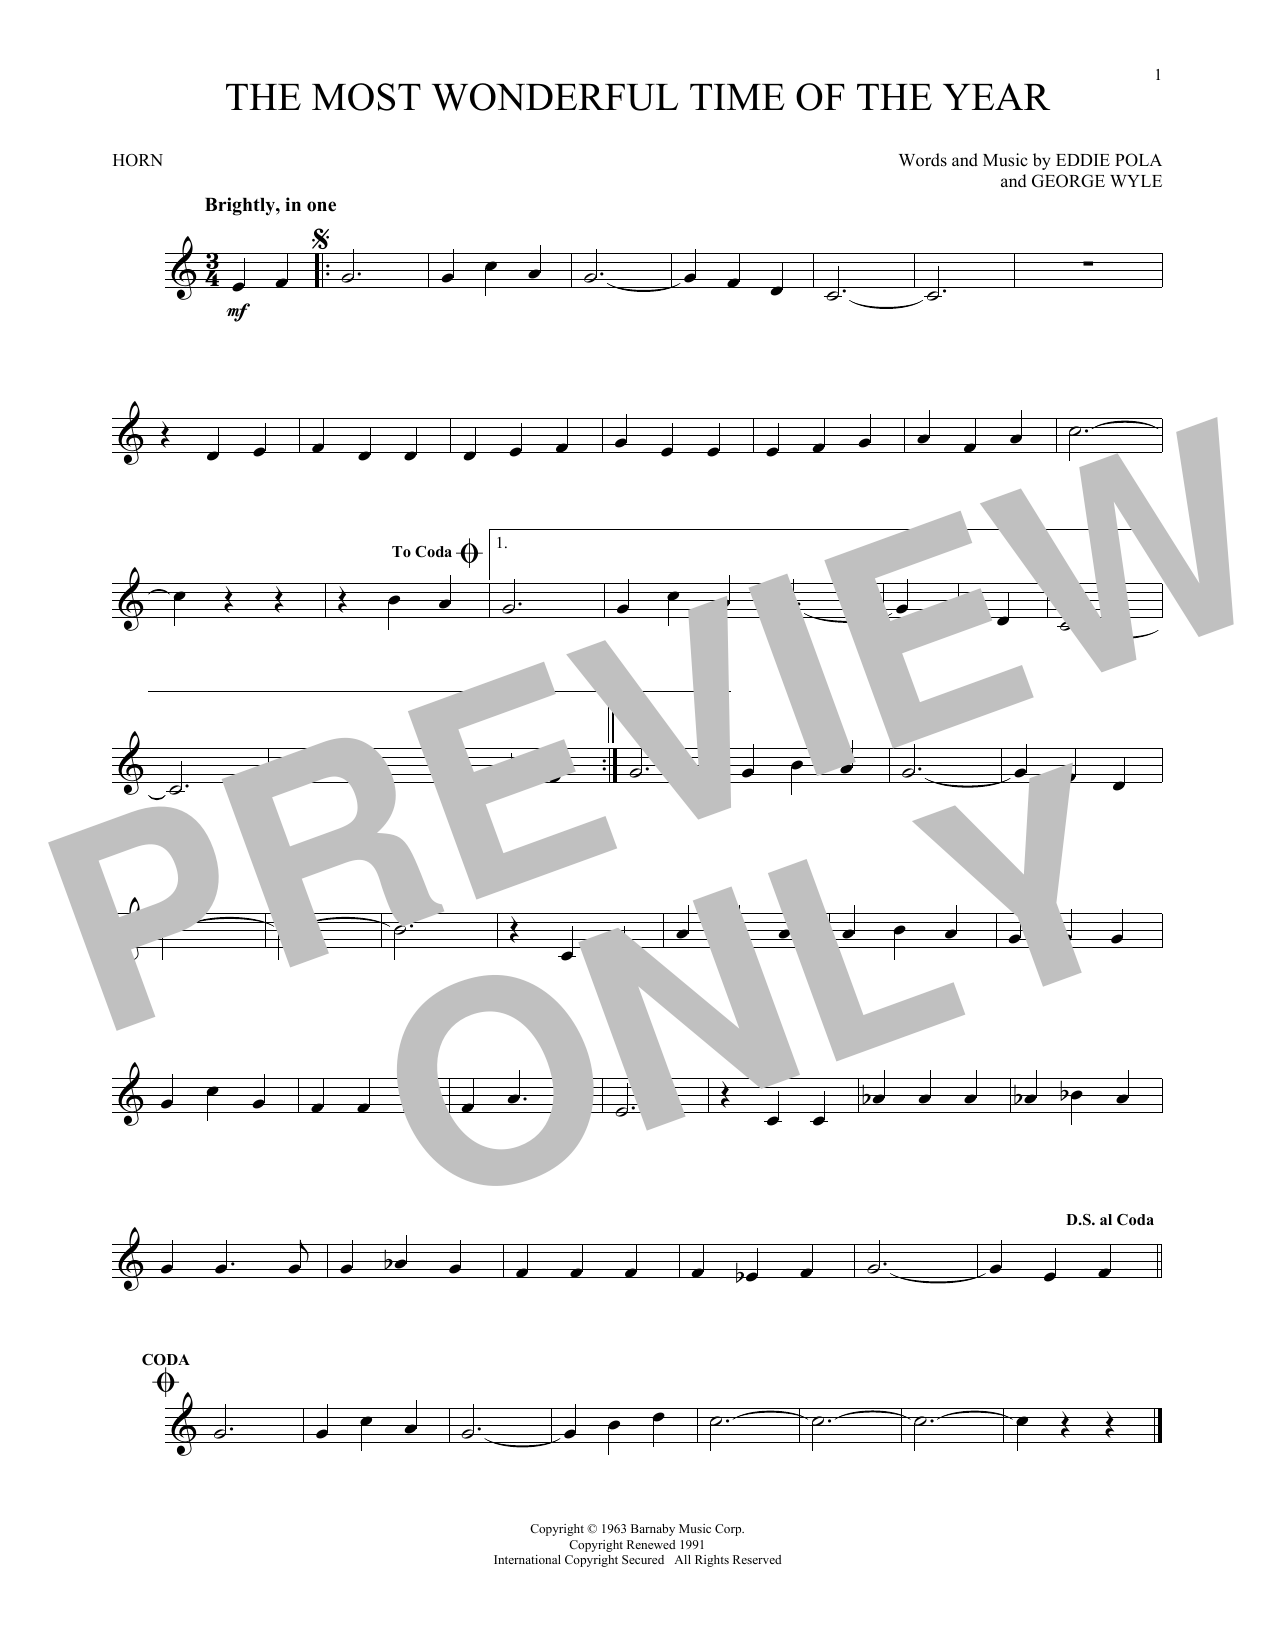 Download George Wyle & Eddie Pola The Most Wonderful Time Of The Year Sheet Music